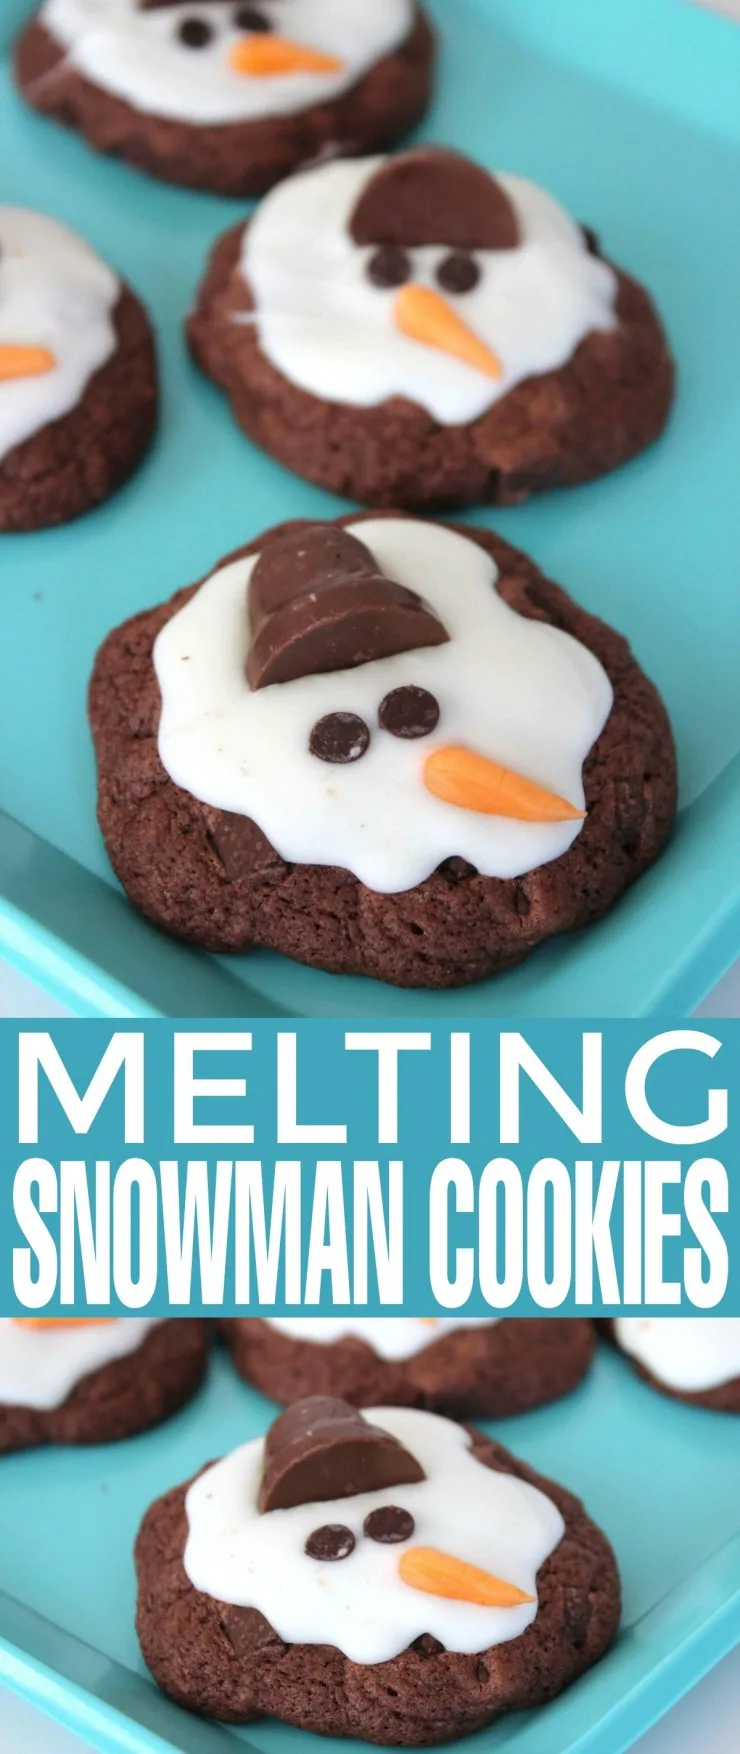 Aren't these Melting Snowman Cookies simply adorable? These cookies are a fun winter treat - and perfect for school Christmas parties too!